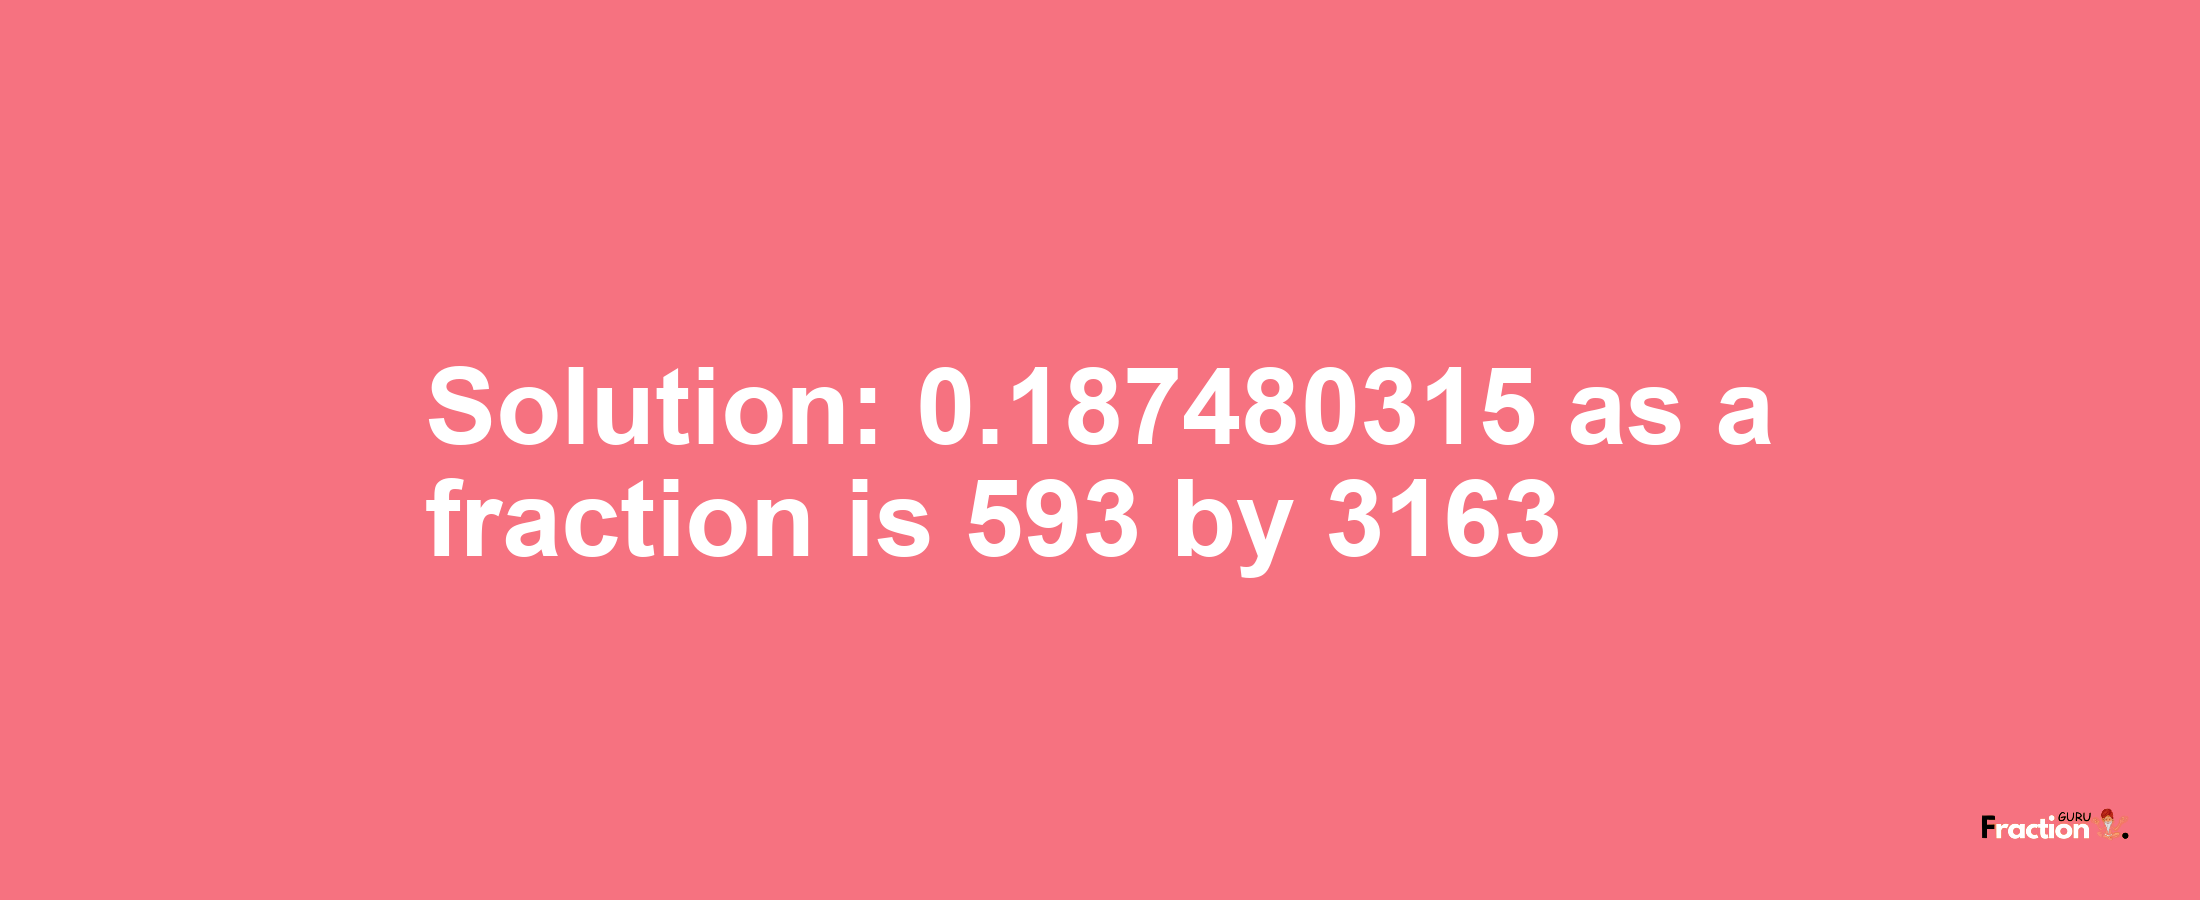 Solution:0.187480315 as a fraction is 593/3163